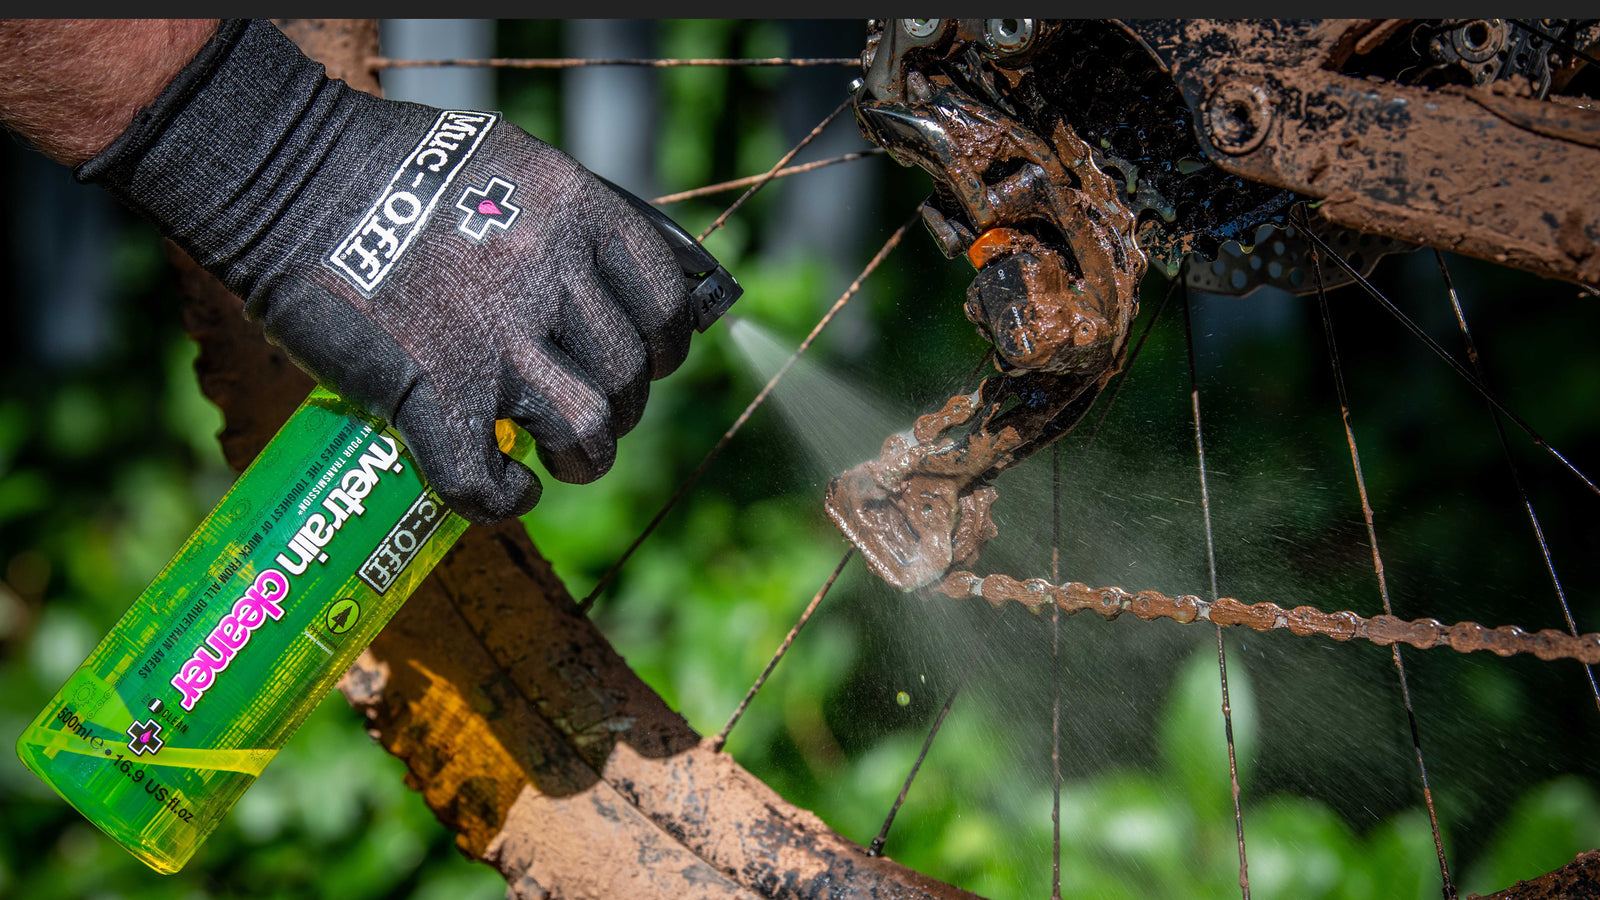 Muc-Off Dry Chain Lube - Airborne Bicycles